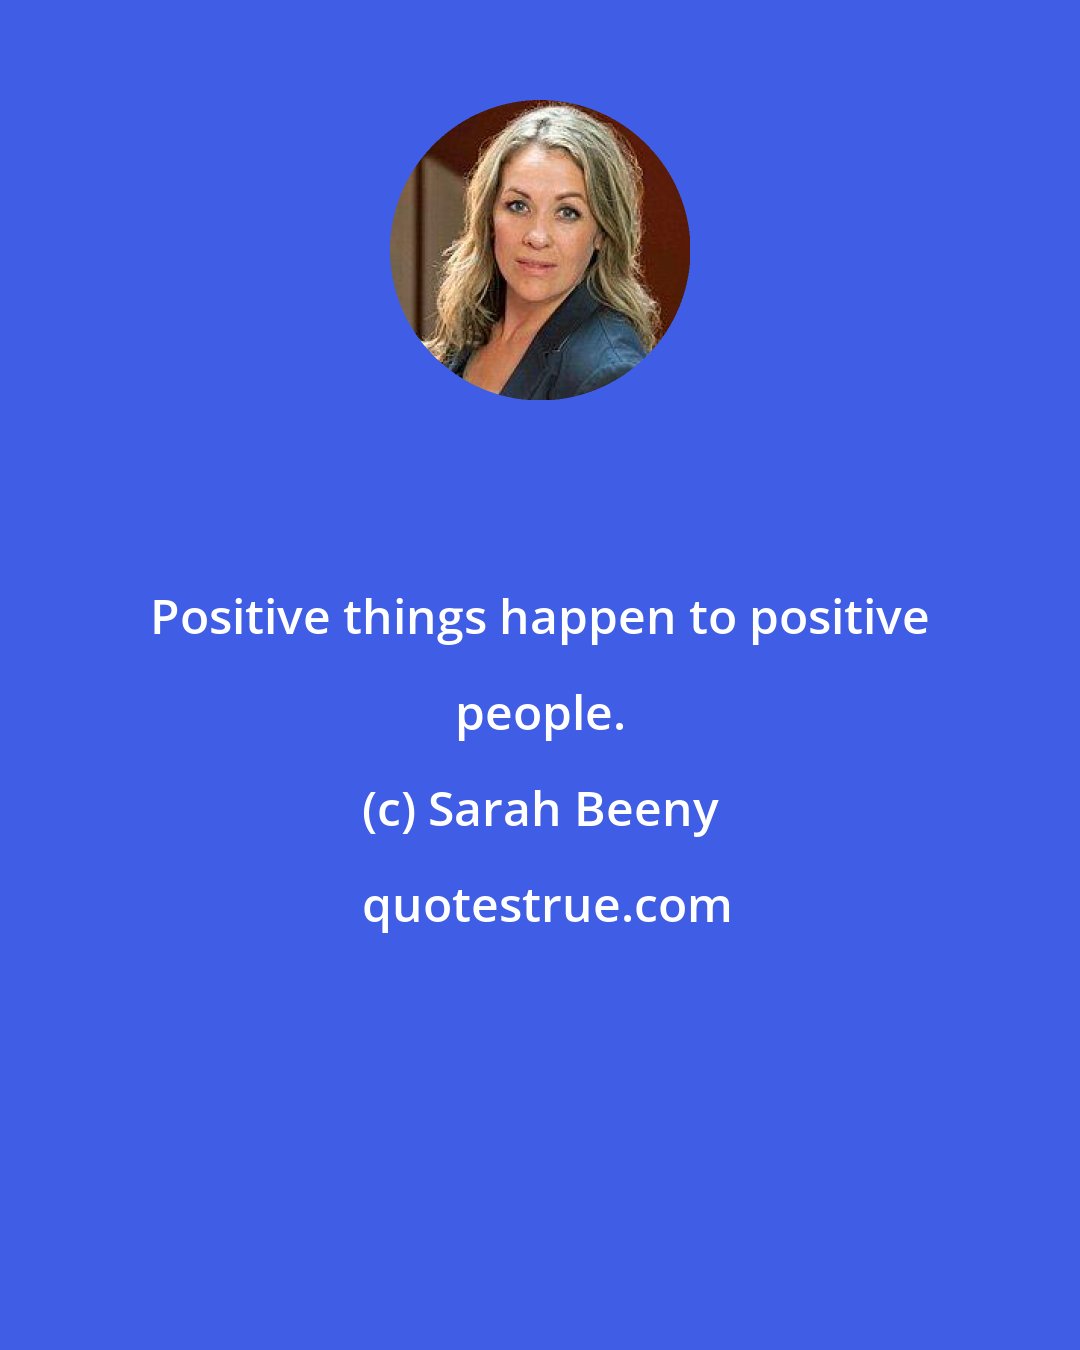 Sarah Beeny: Positive things happen to positive people.